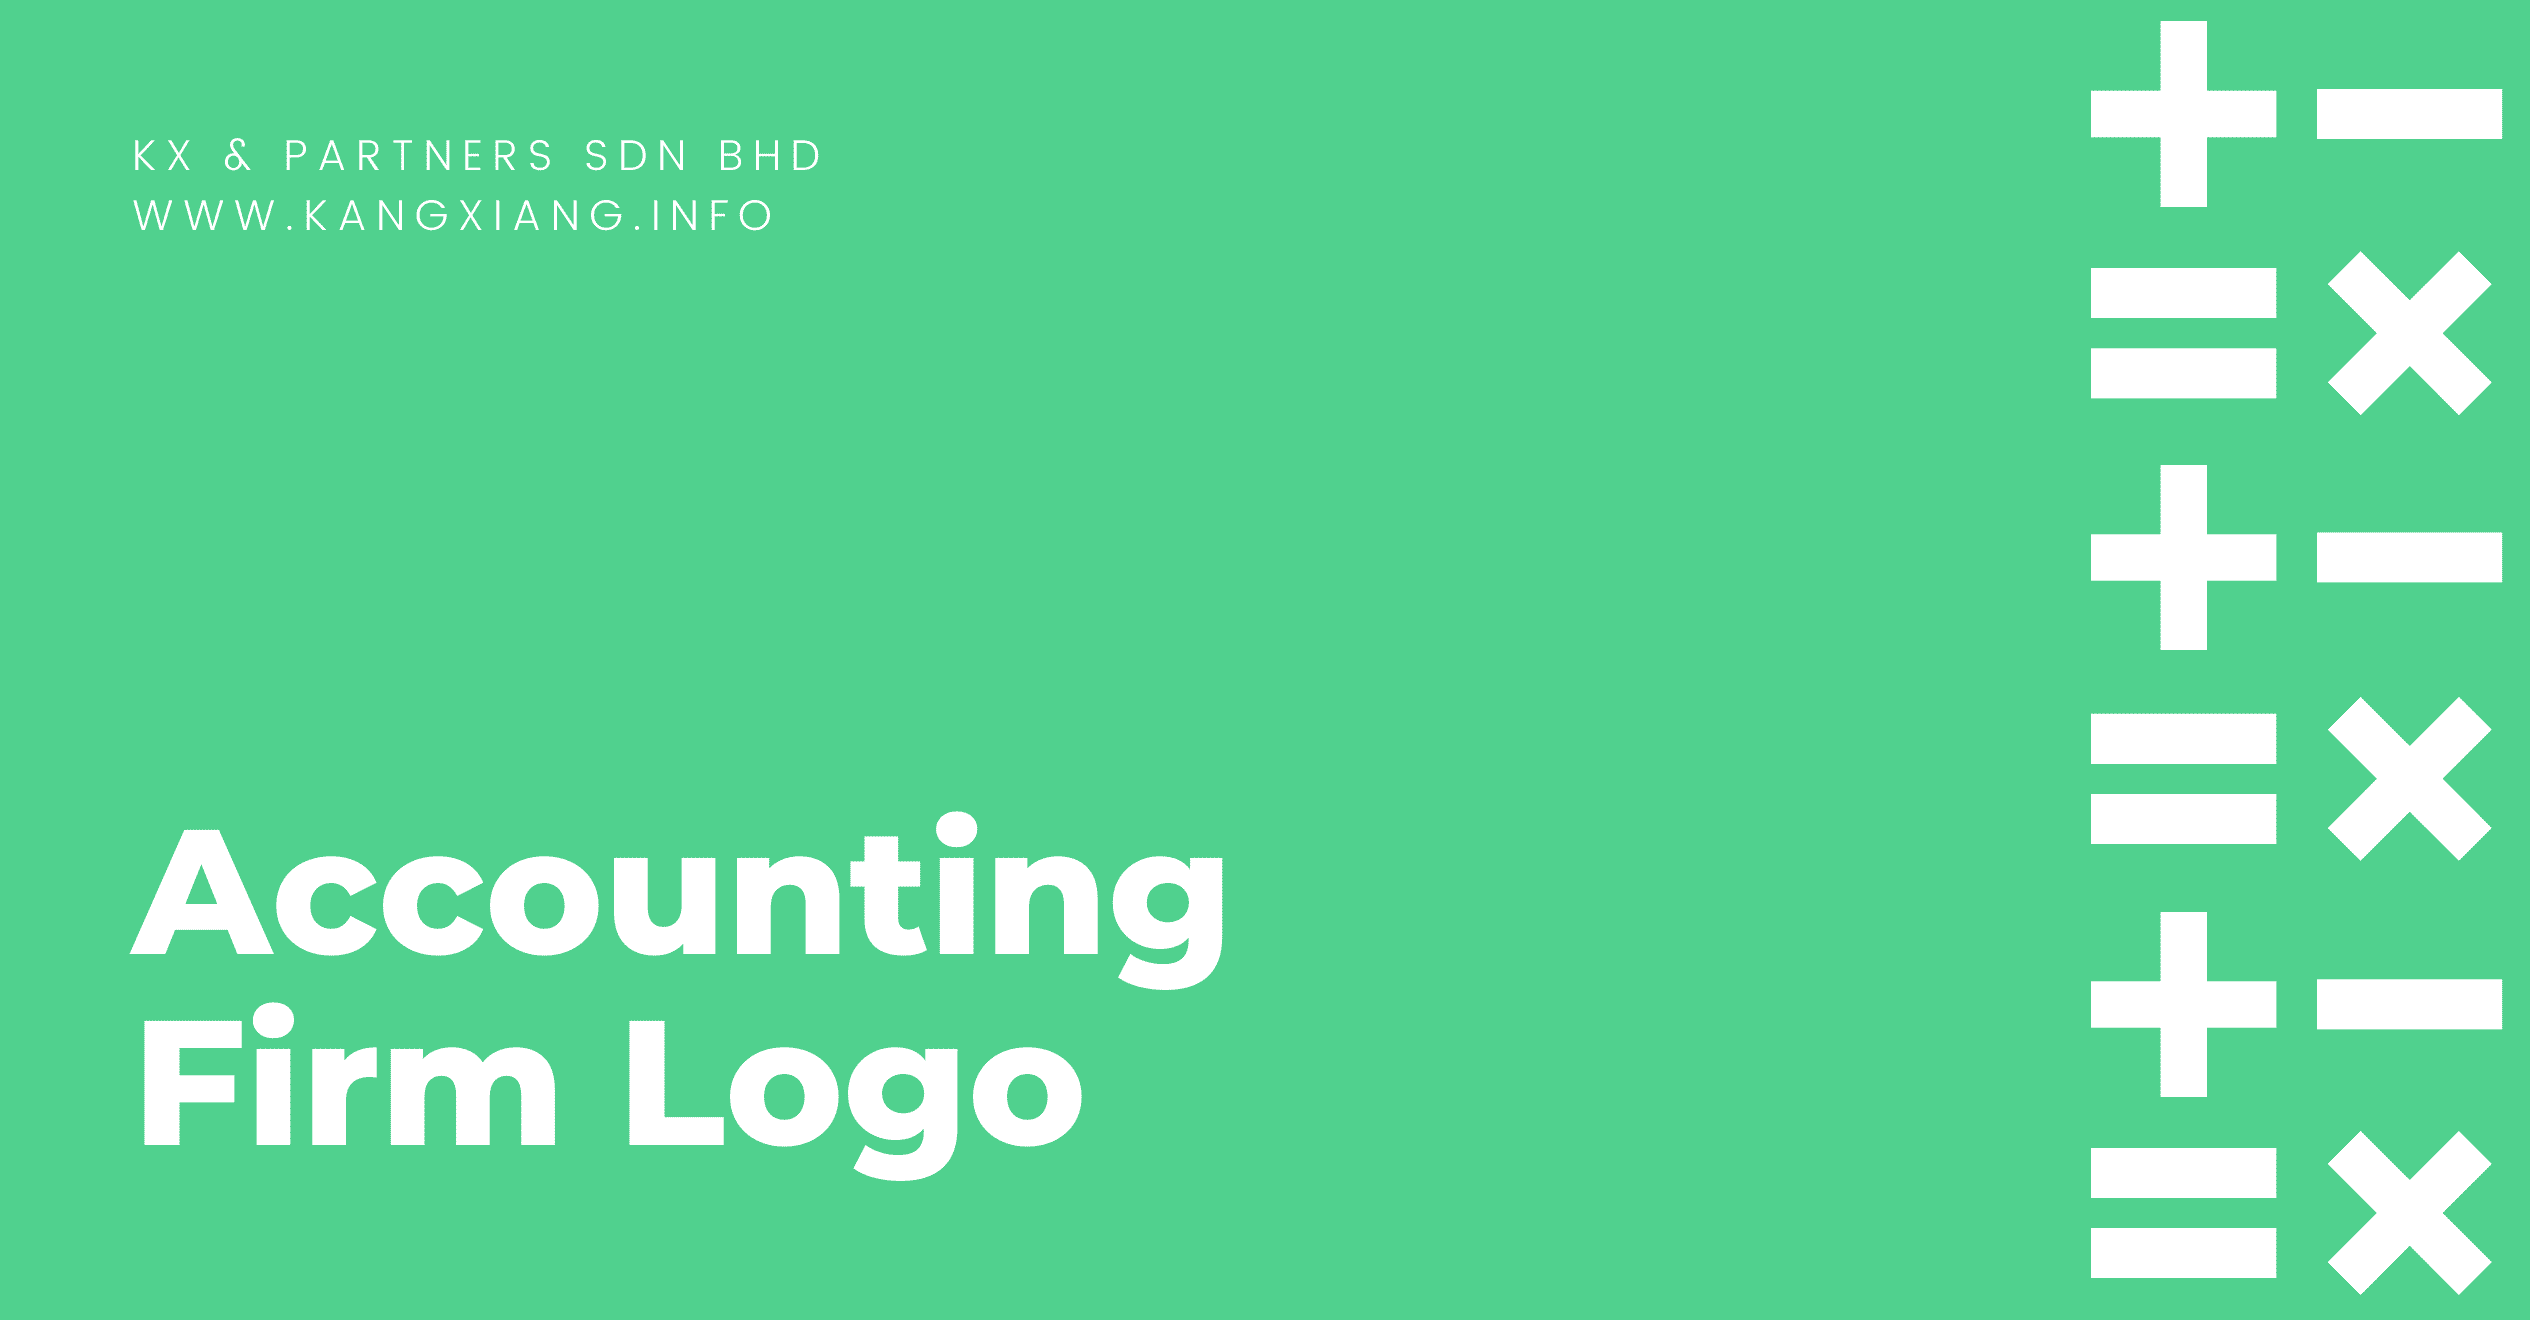 How To Design An Accounting Firm Logo?